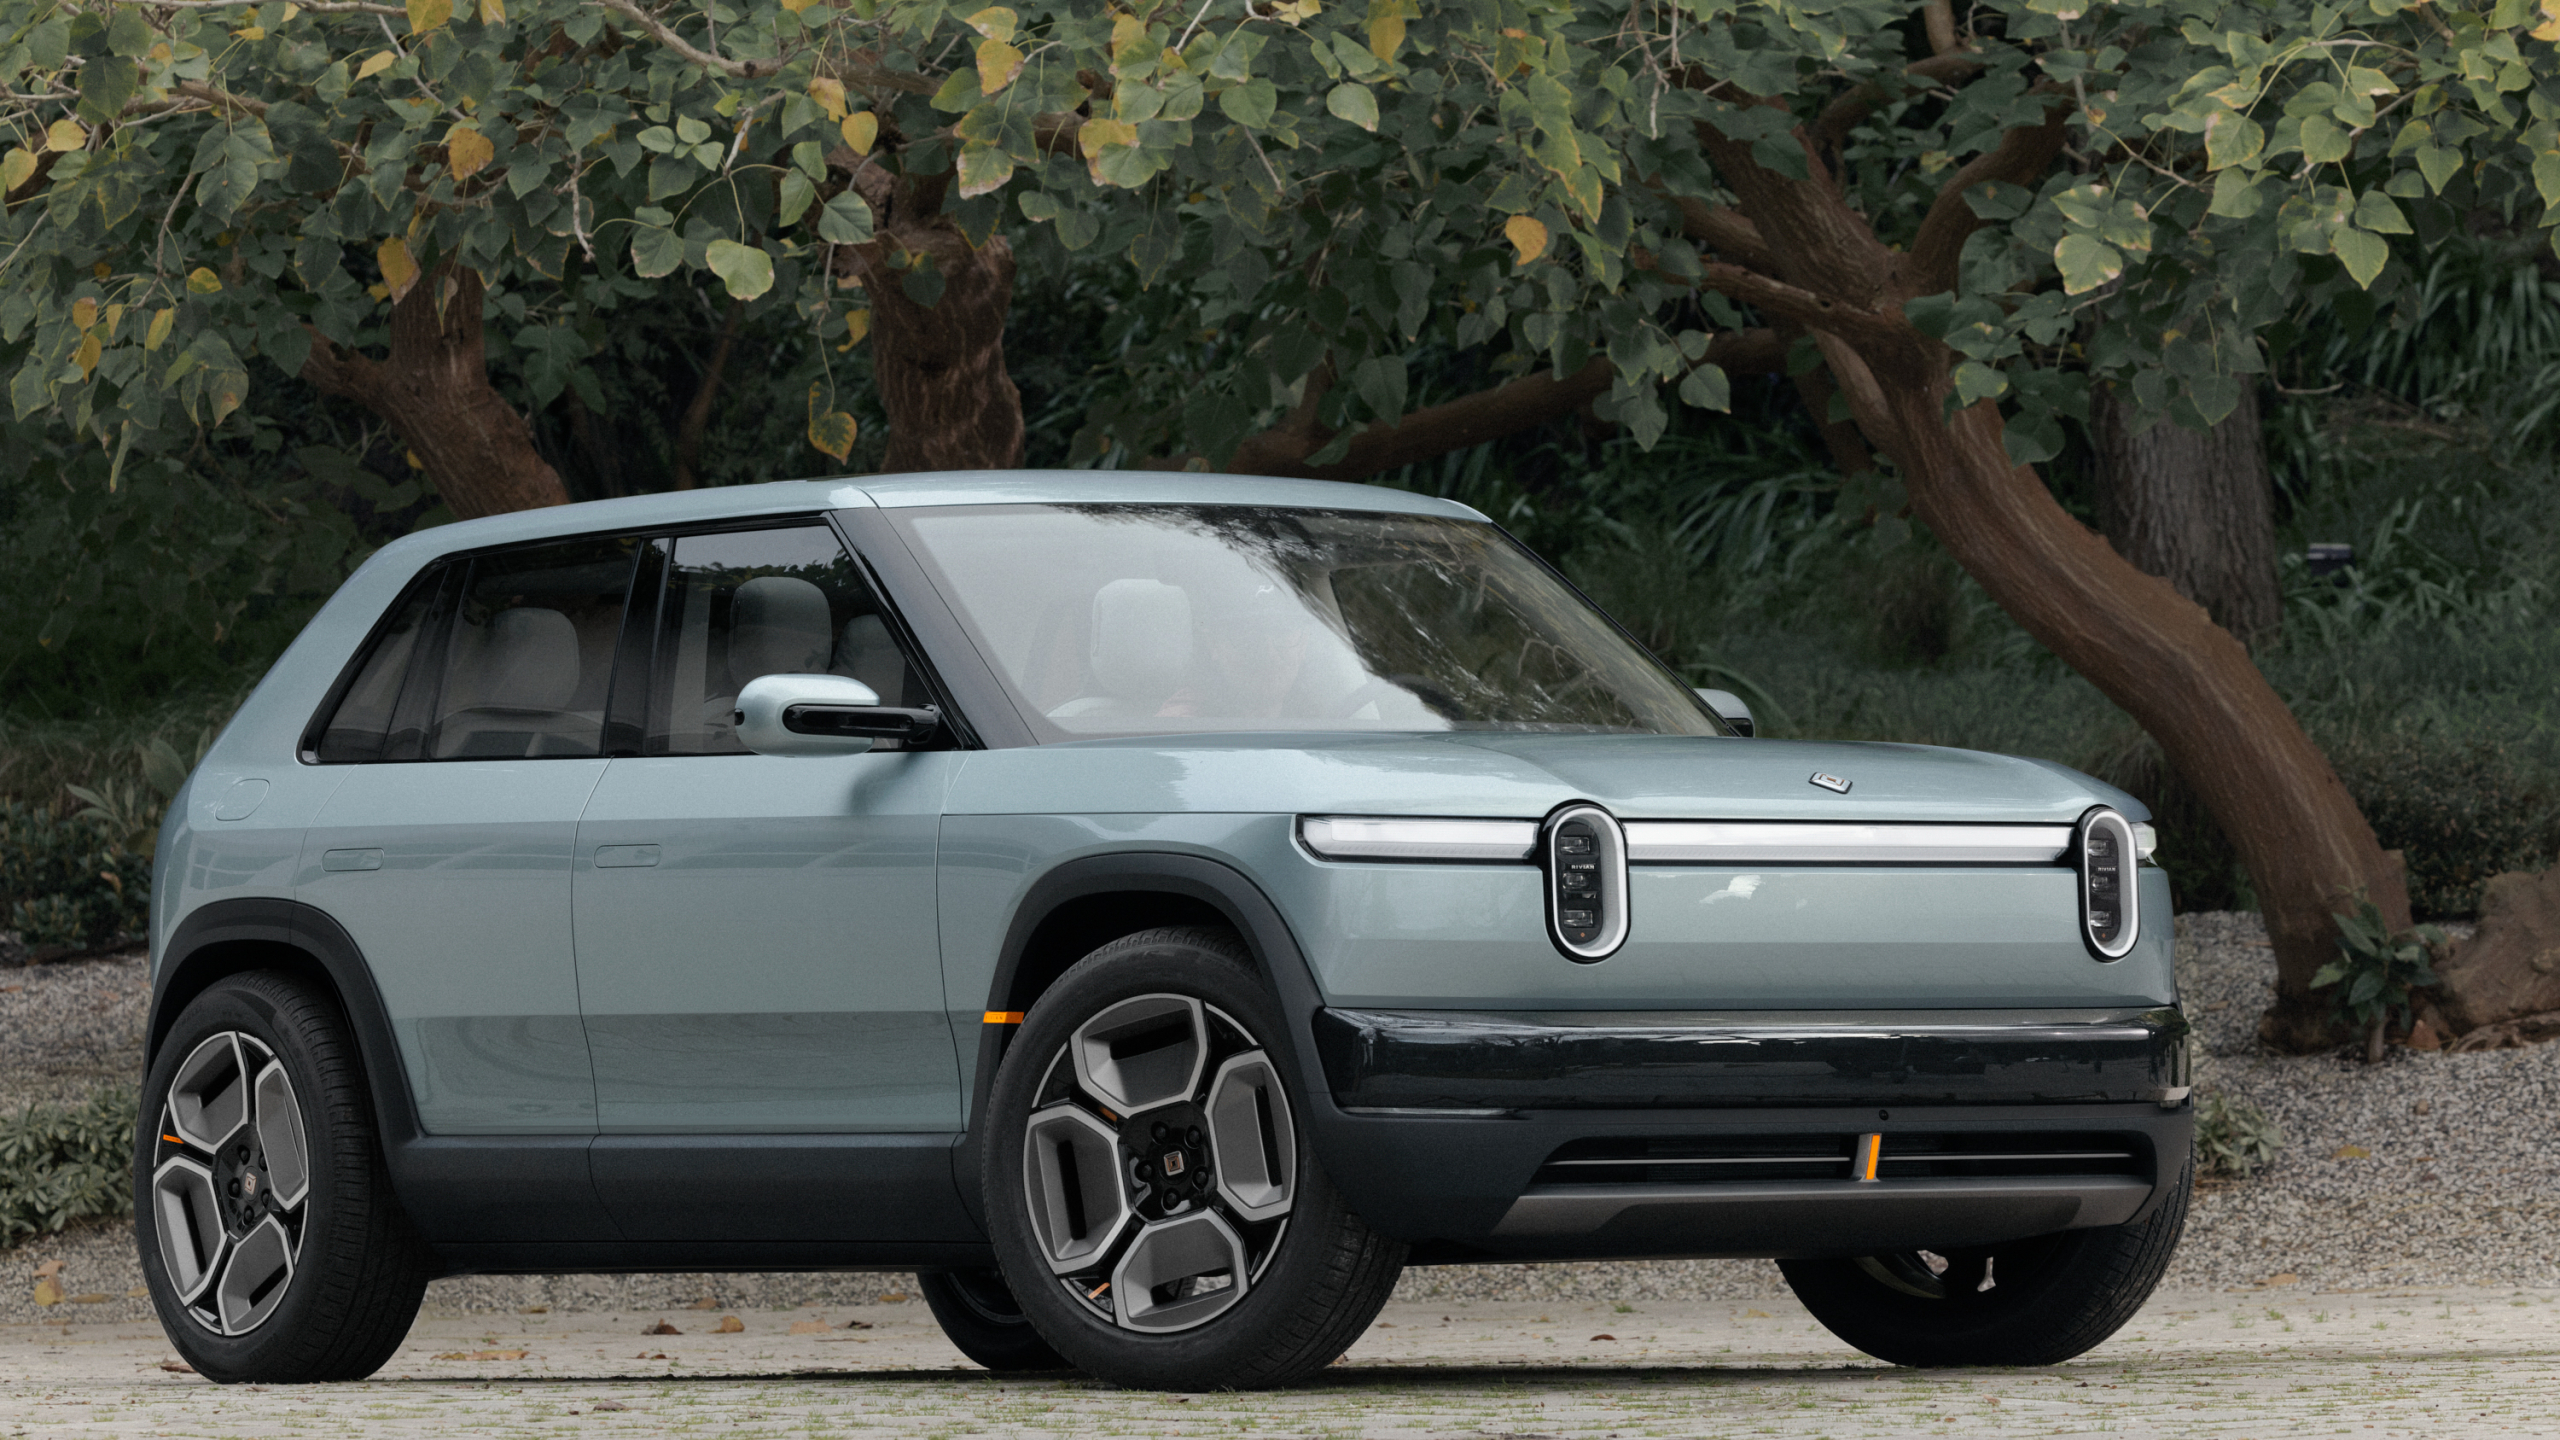 Rivian reveals new vehicles, shifts new EV vehicle production to factory in Normal